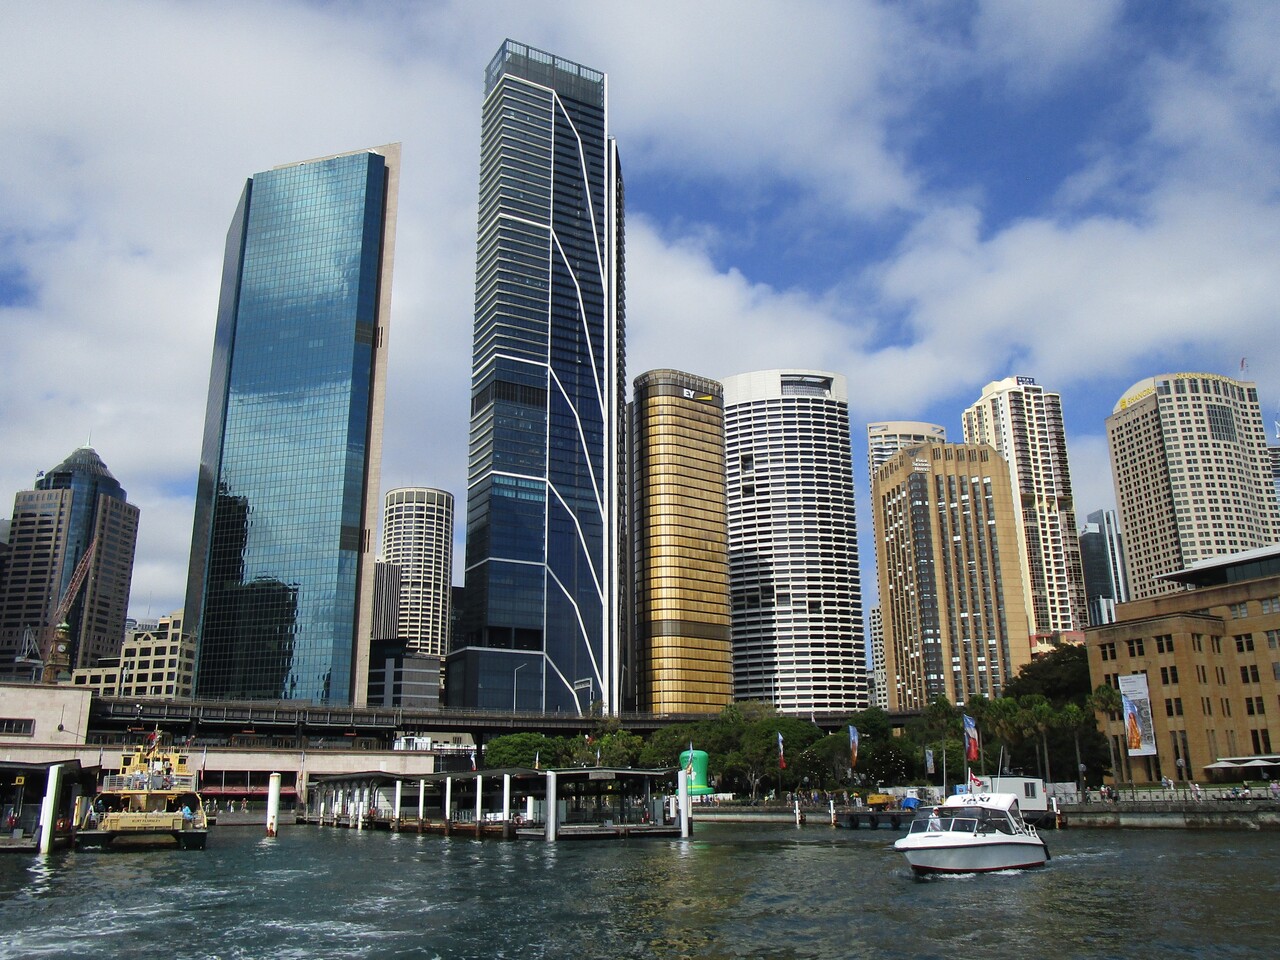 Ferry-to-Taronga-Zoo-9-Looking-at-Sydney-skyscrapers-3-copy.JPG